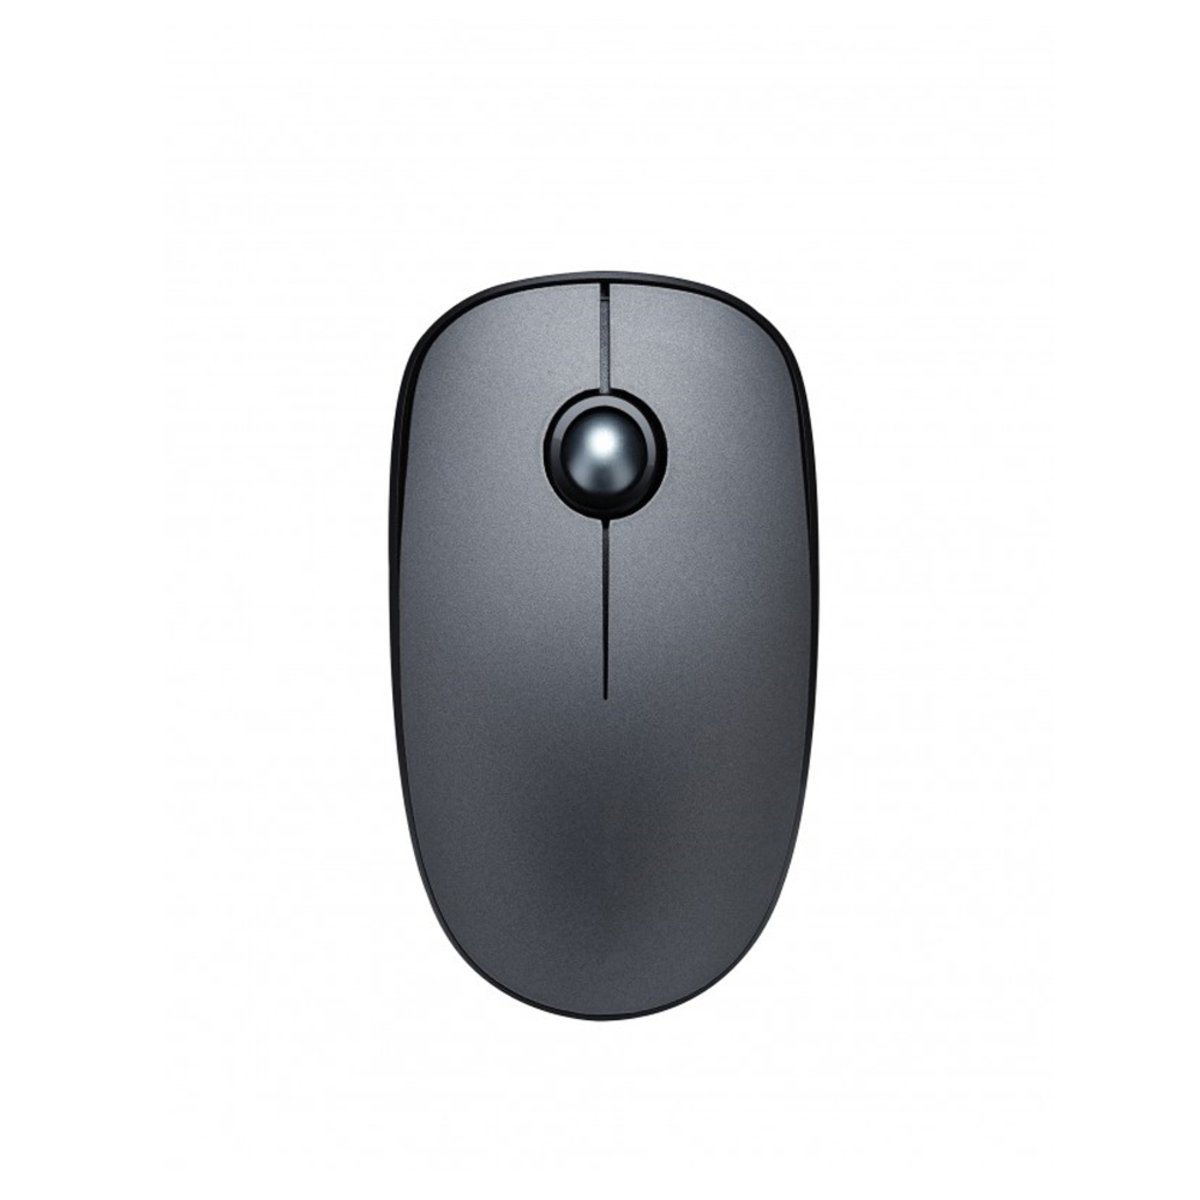 Buy Trands 2.4G Wireless Optical Mouse for Notebook, PC, Laptop, Computer MU304 Online at Best Price |  PC Mouse | Lulu KSA in Saudi Arabia